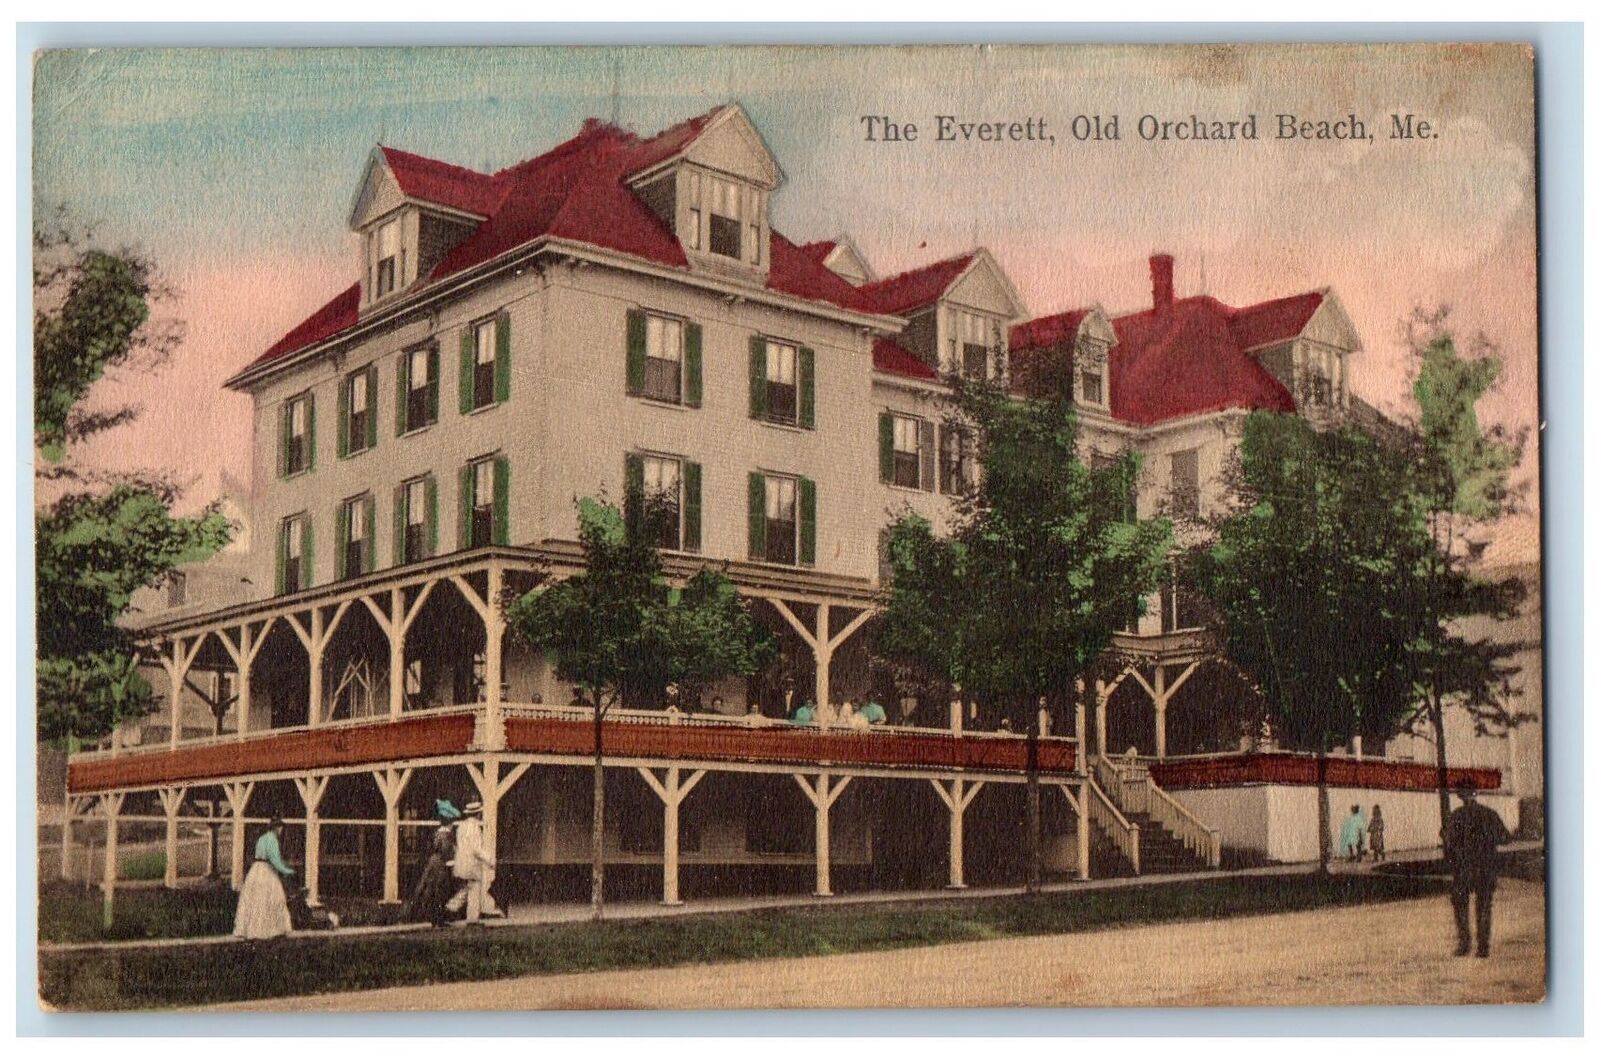 1908 The Everett Overview Building Stairs Porch Old Orchard Beach Maine Postcard